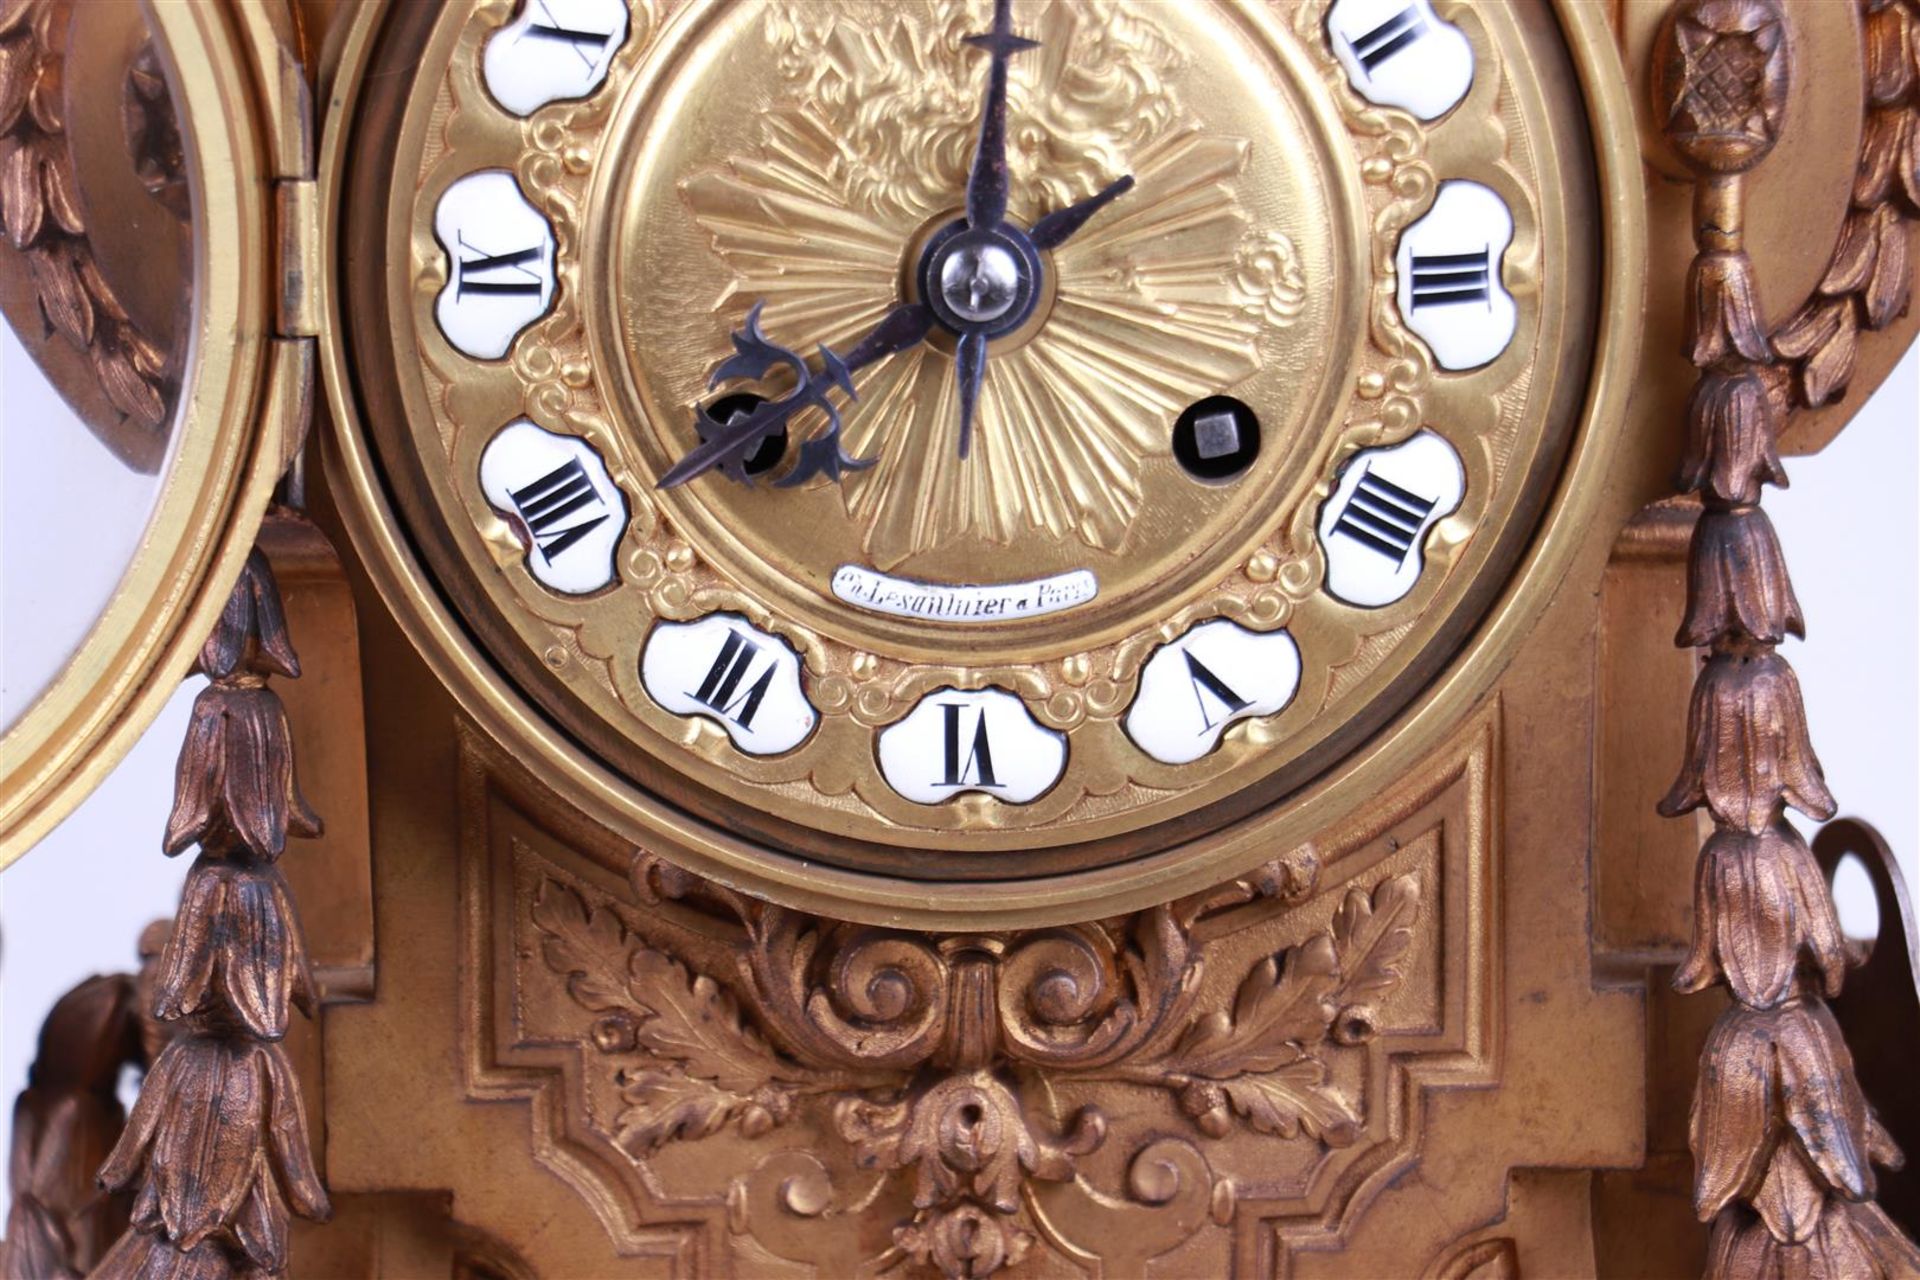 Cast Bronze Clock Set in Louis XVI Style (France, 19th Century) - Image 9 of 9